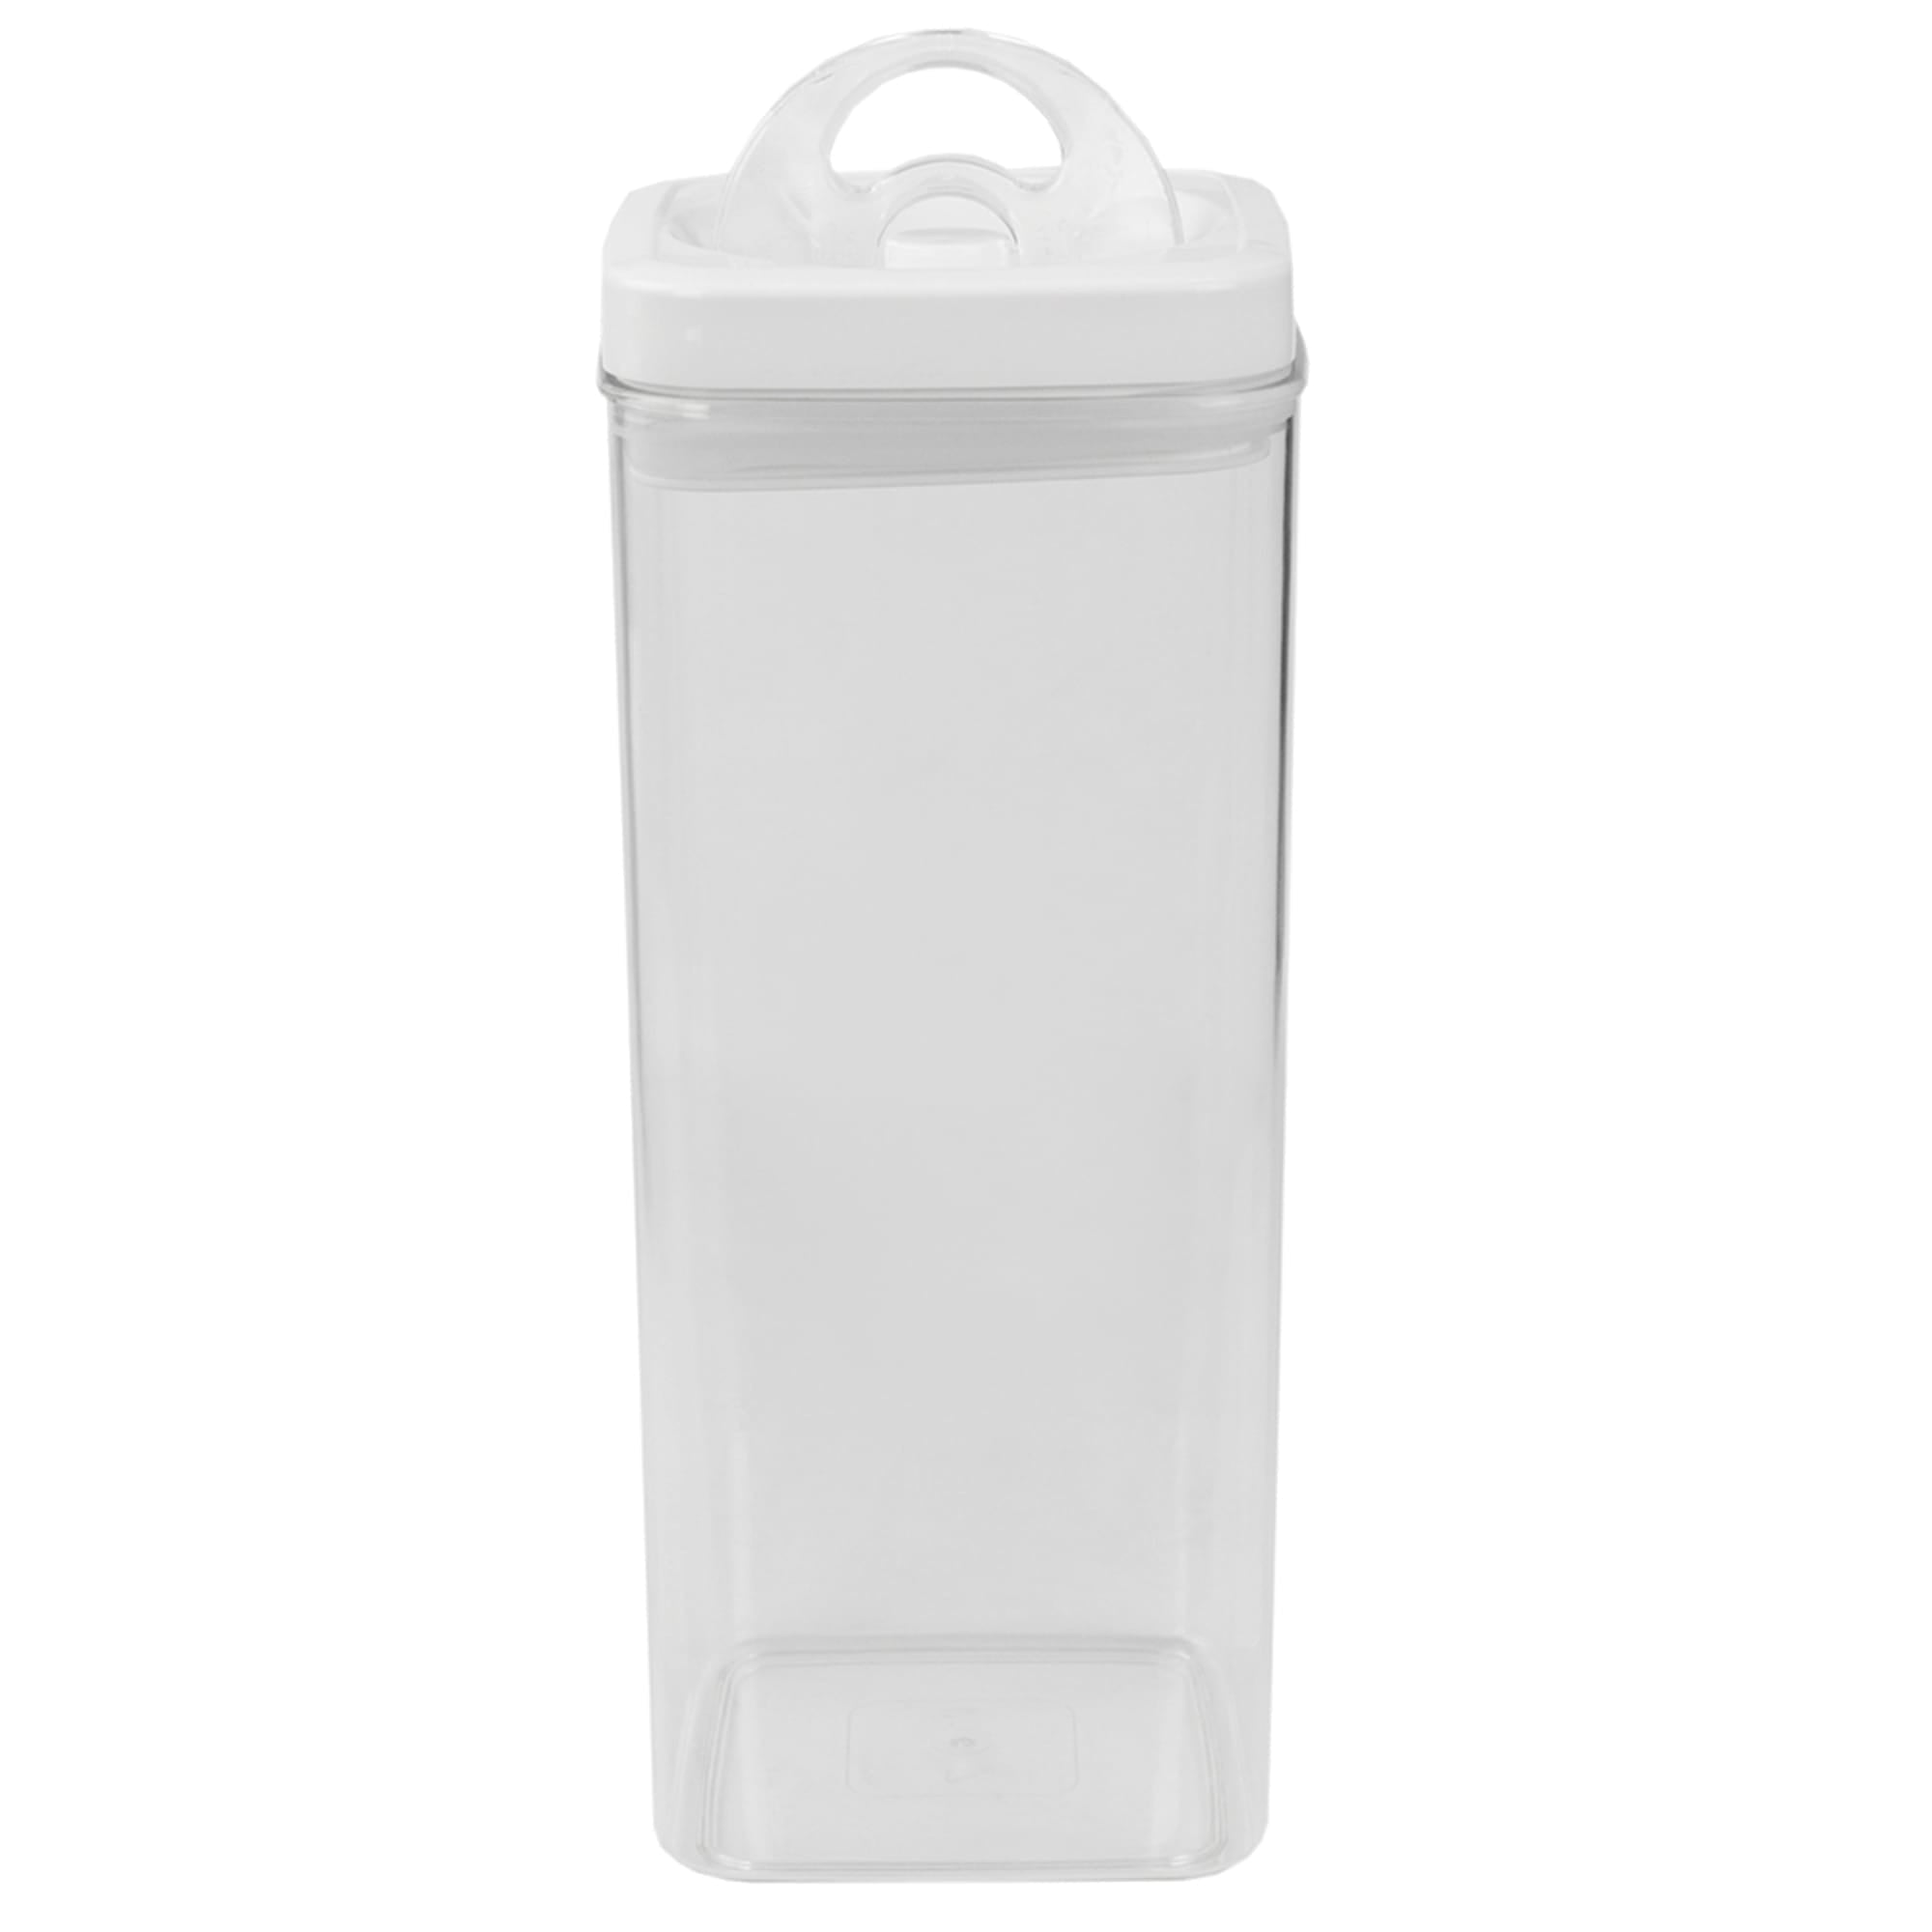 Home Basics 3.1 Liter Twist 'N Lock Air-Tight Square Plastic Canister, White $7.00 EACH, CASE PACK OF 6